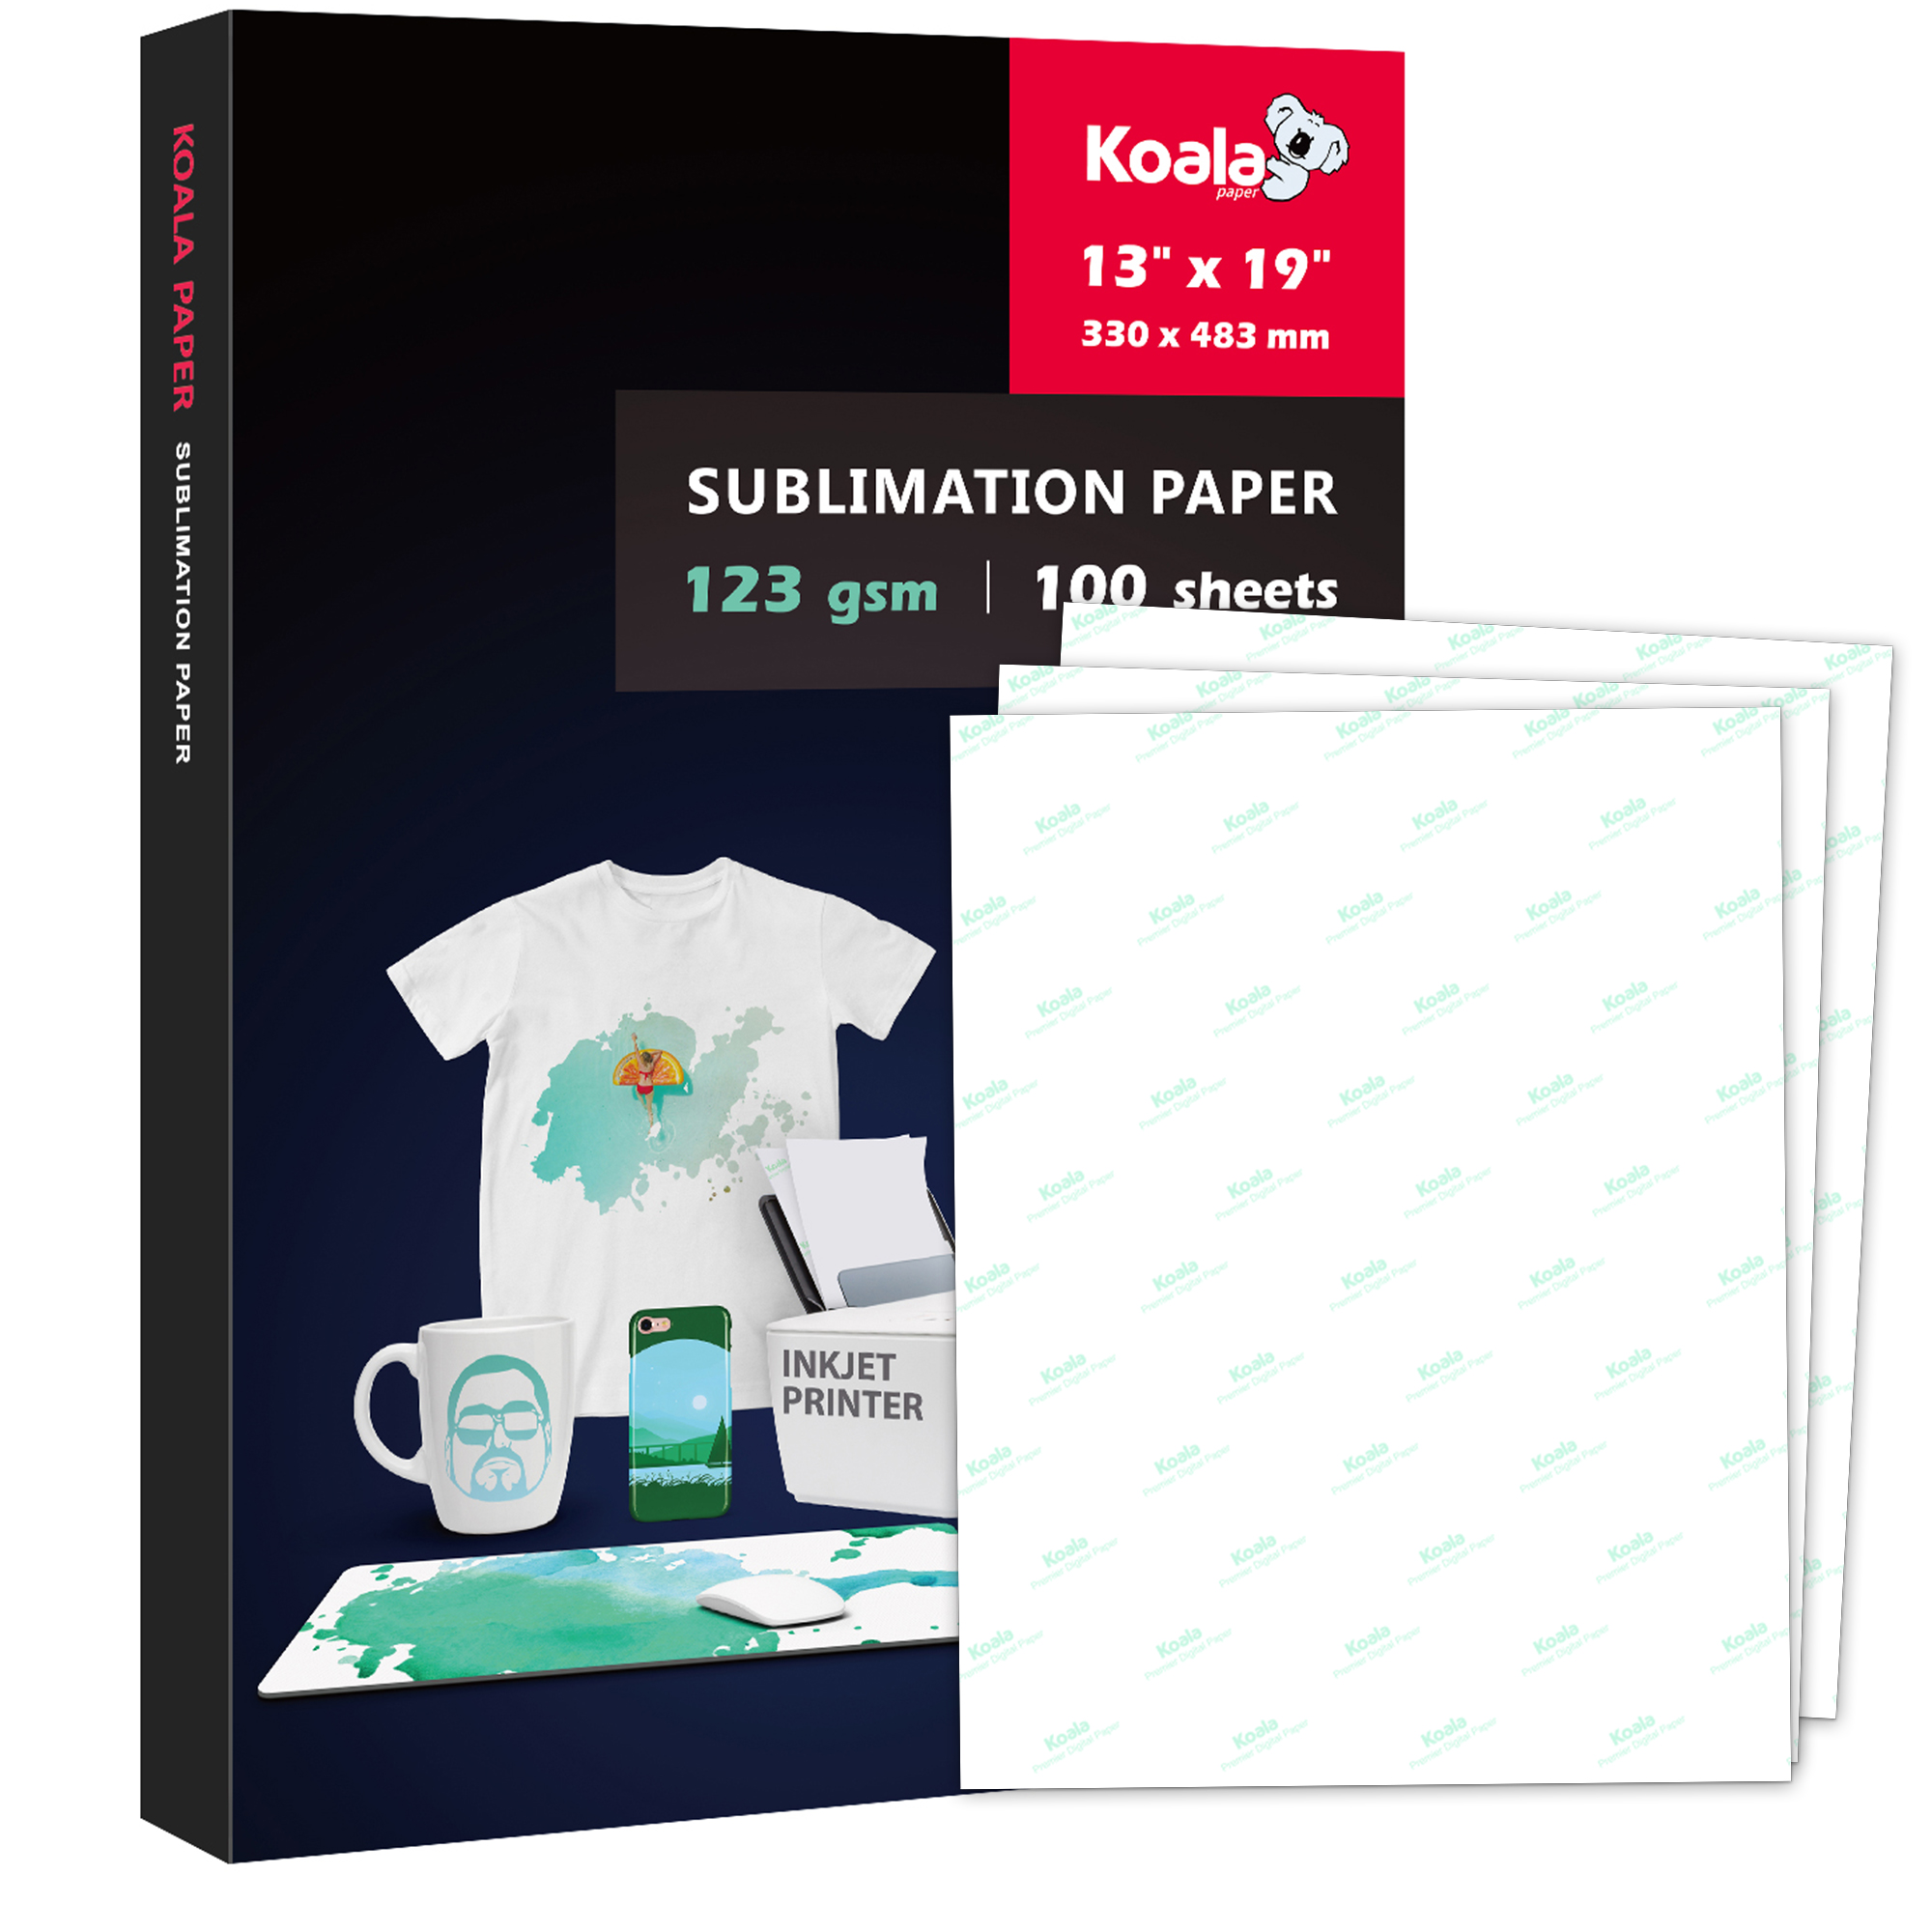 Koala Sublimation Paper 13x19 Inches Super Size Heat Transfer 50 Sheets Only Compatible with Inkjet Printer 123gsm